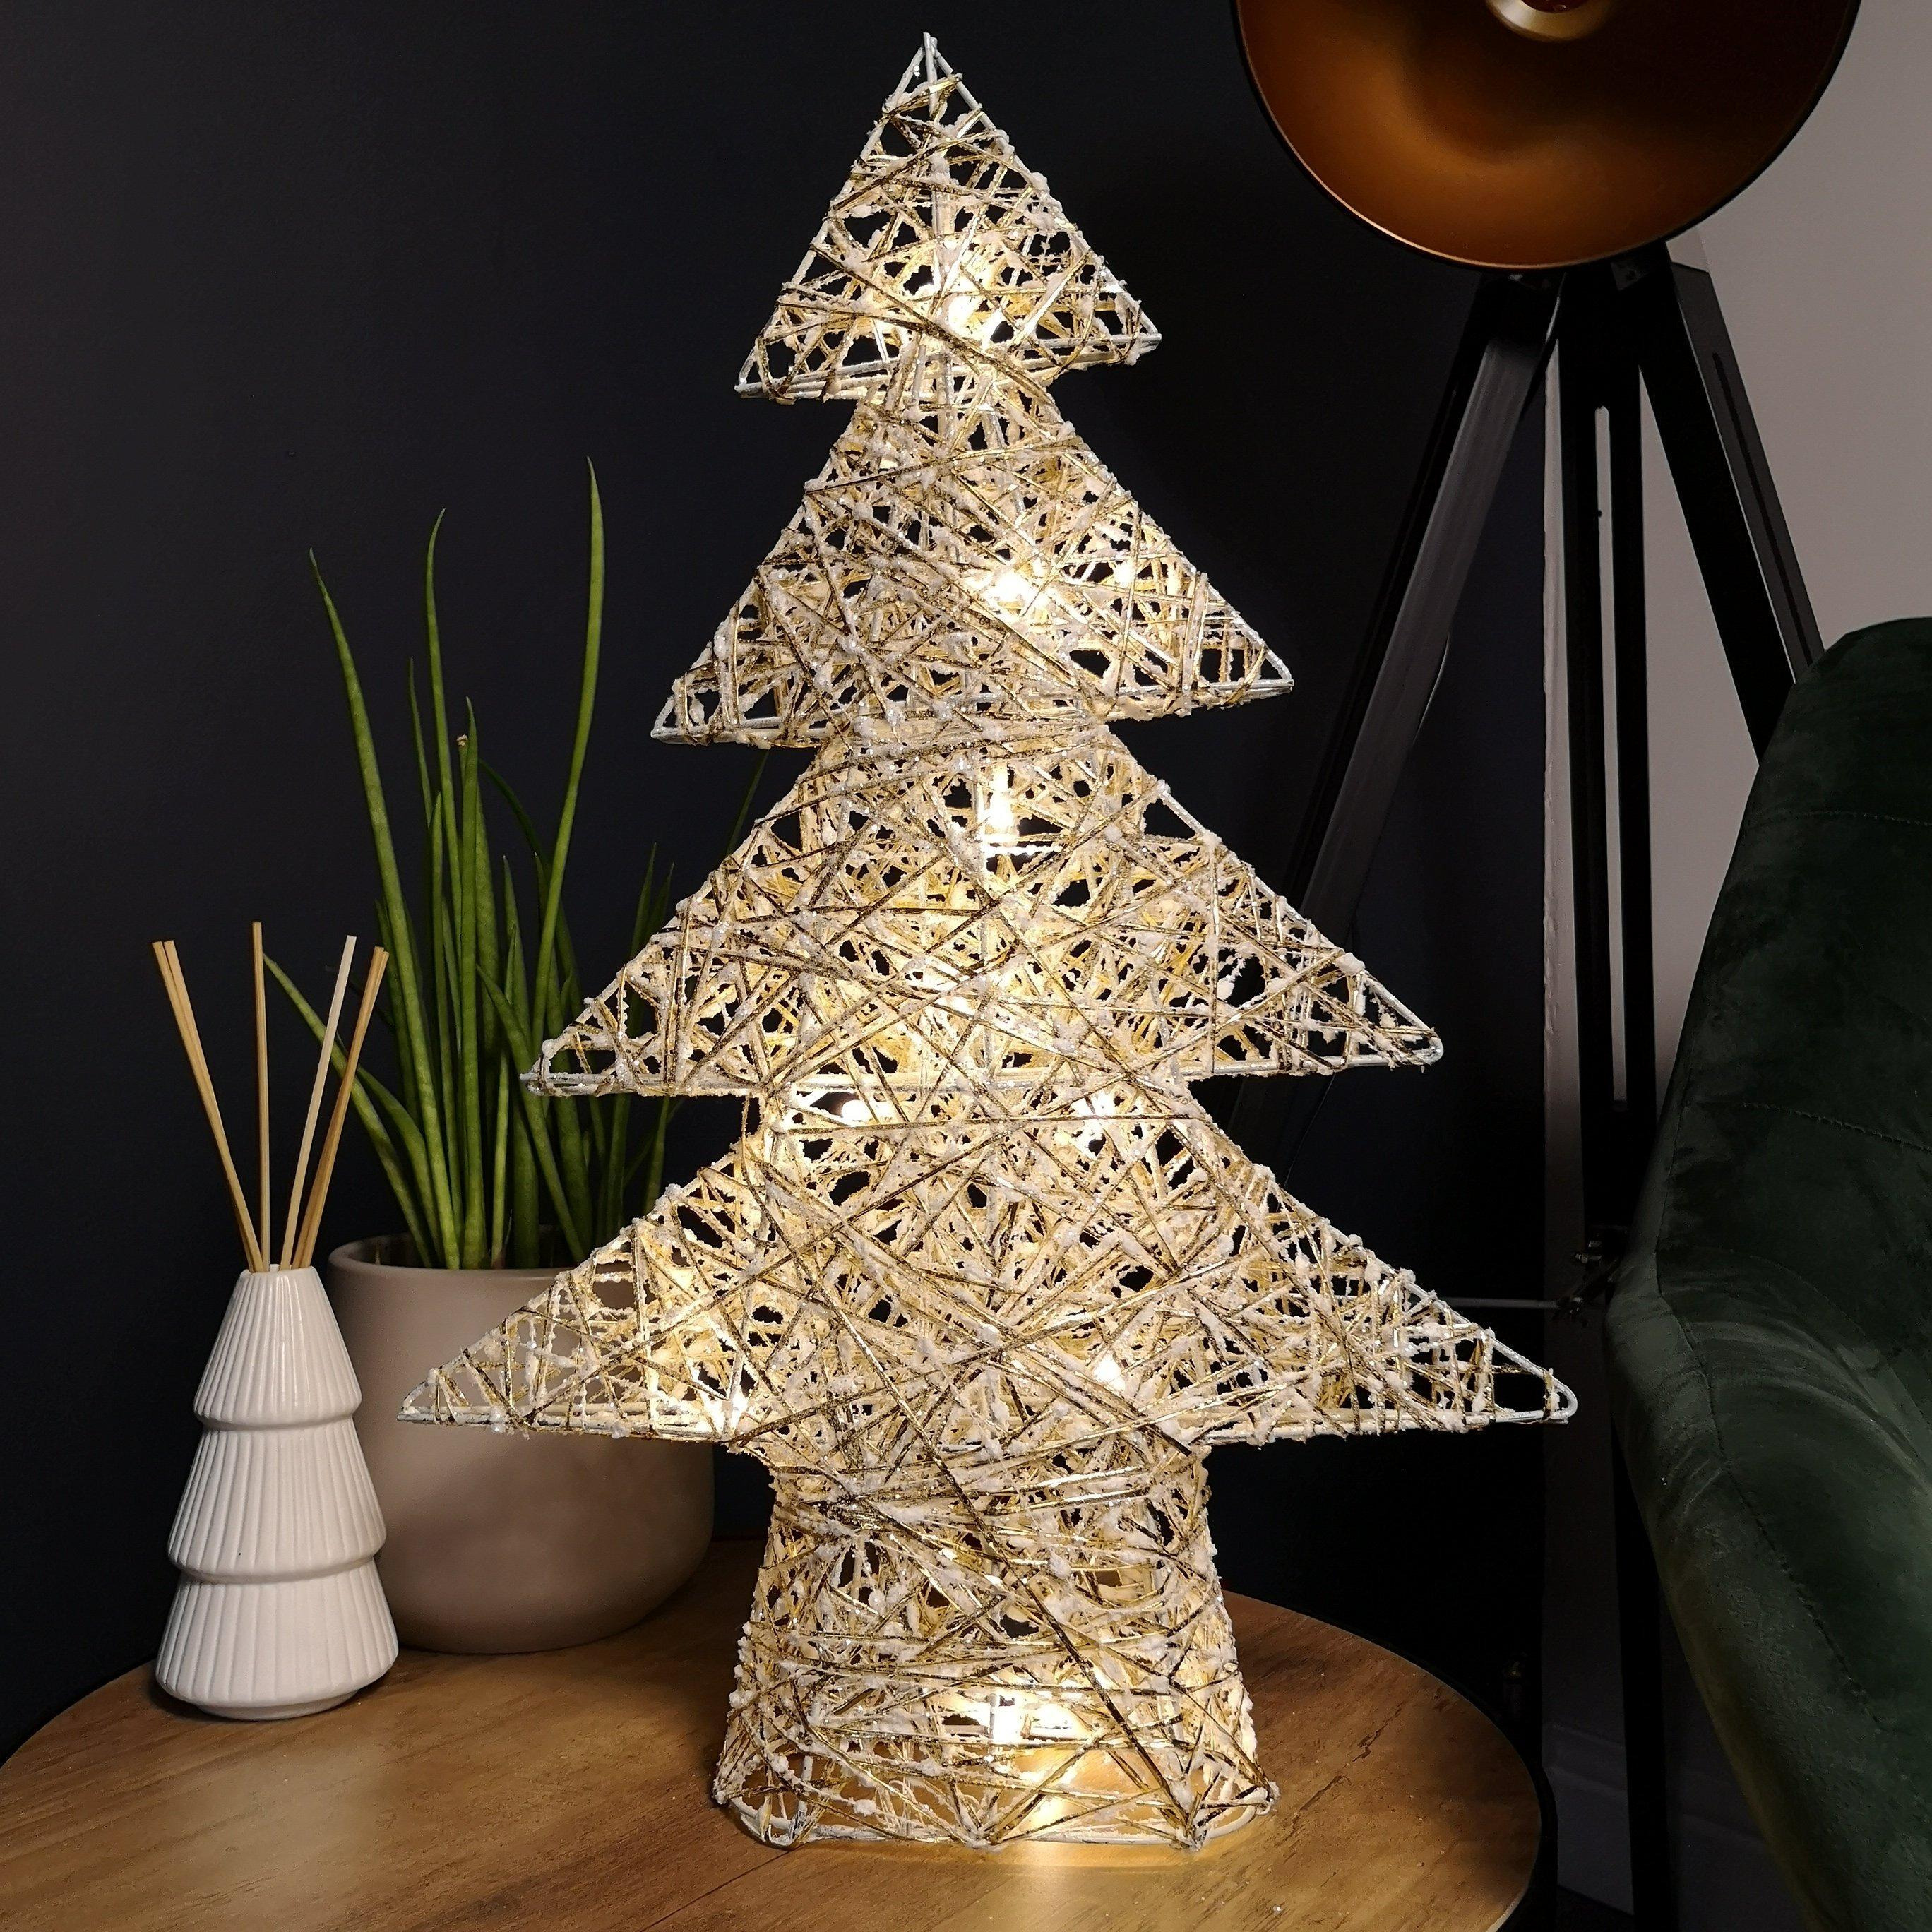 50cm Warm White Battery Operated LED White and Gold Tree Silhouette Christmas Decoration - image 1